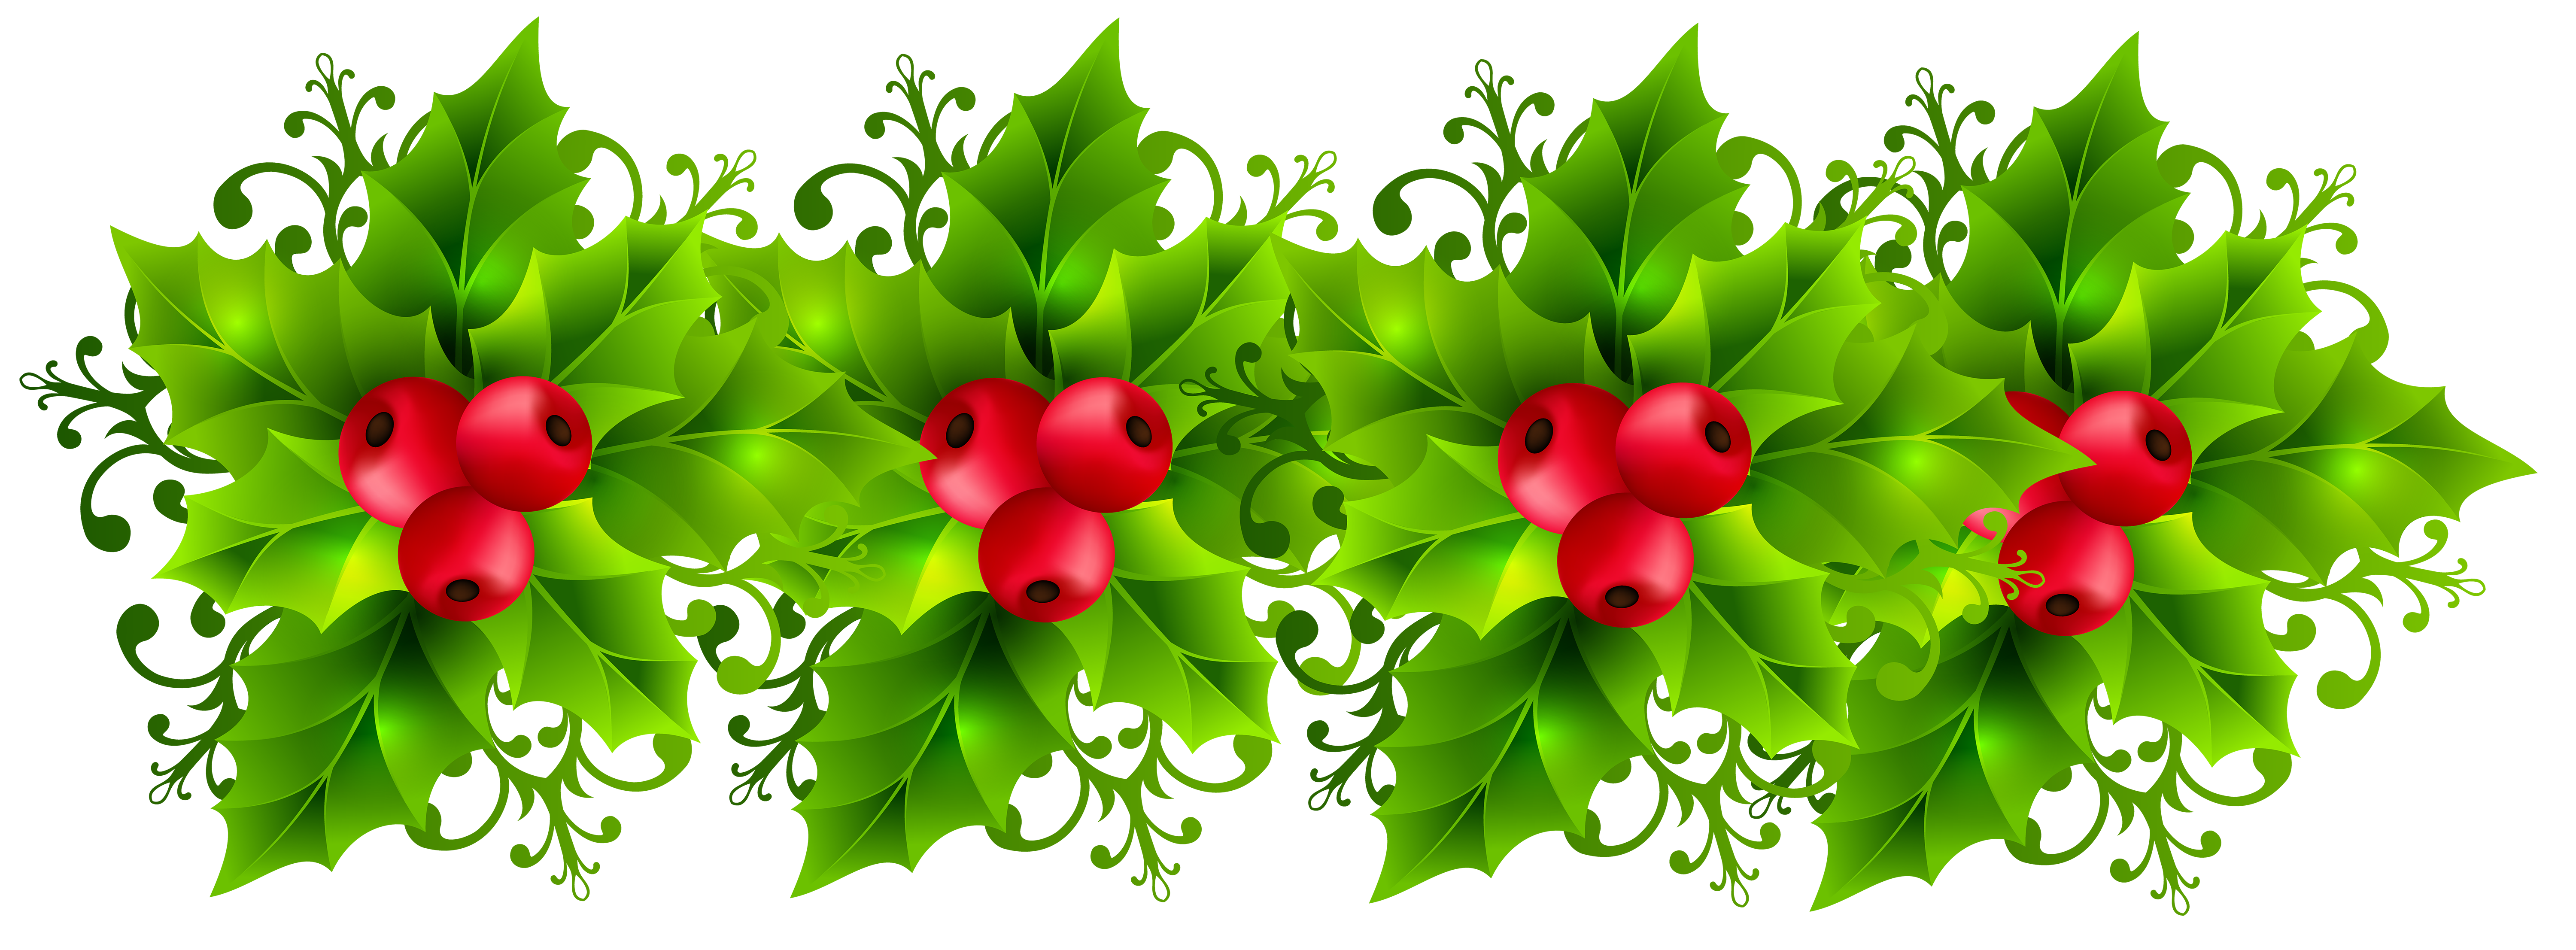 holly clip art png - photo #40